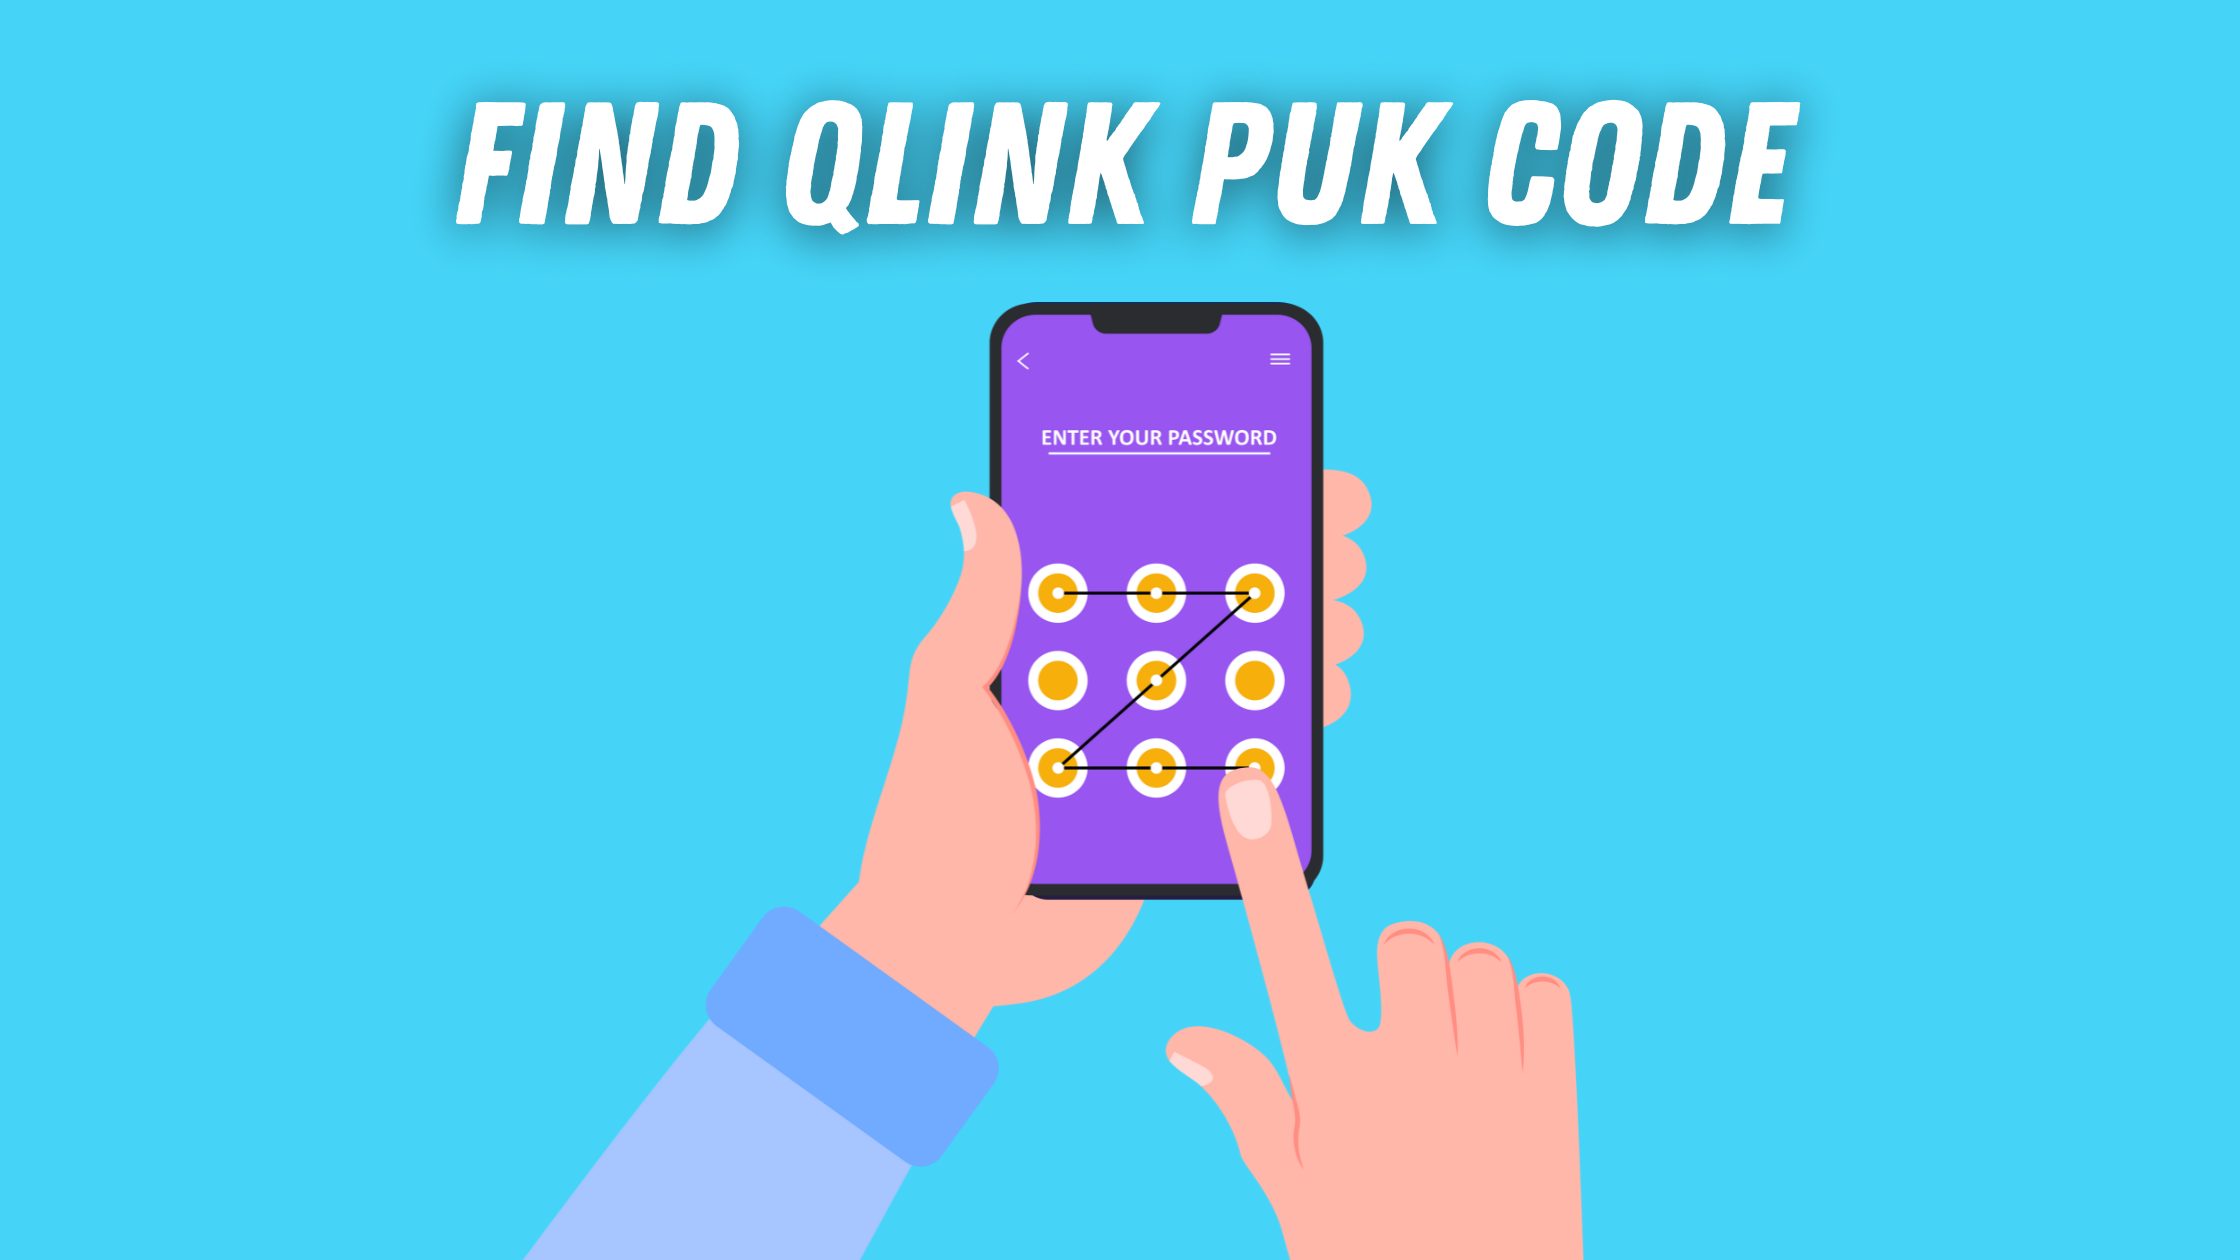 A guide for finding the Qlink PUK Code on a Qlink phone.